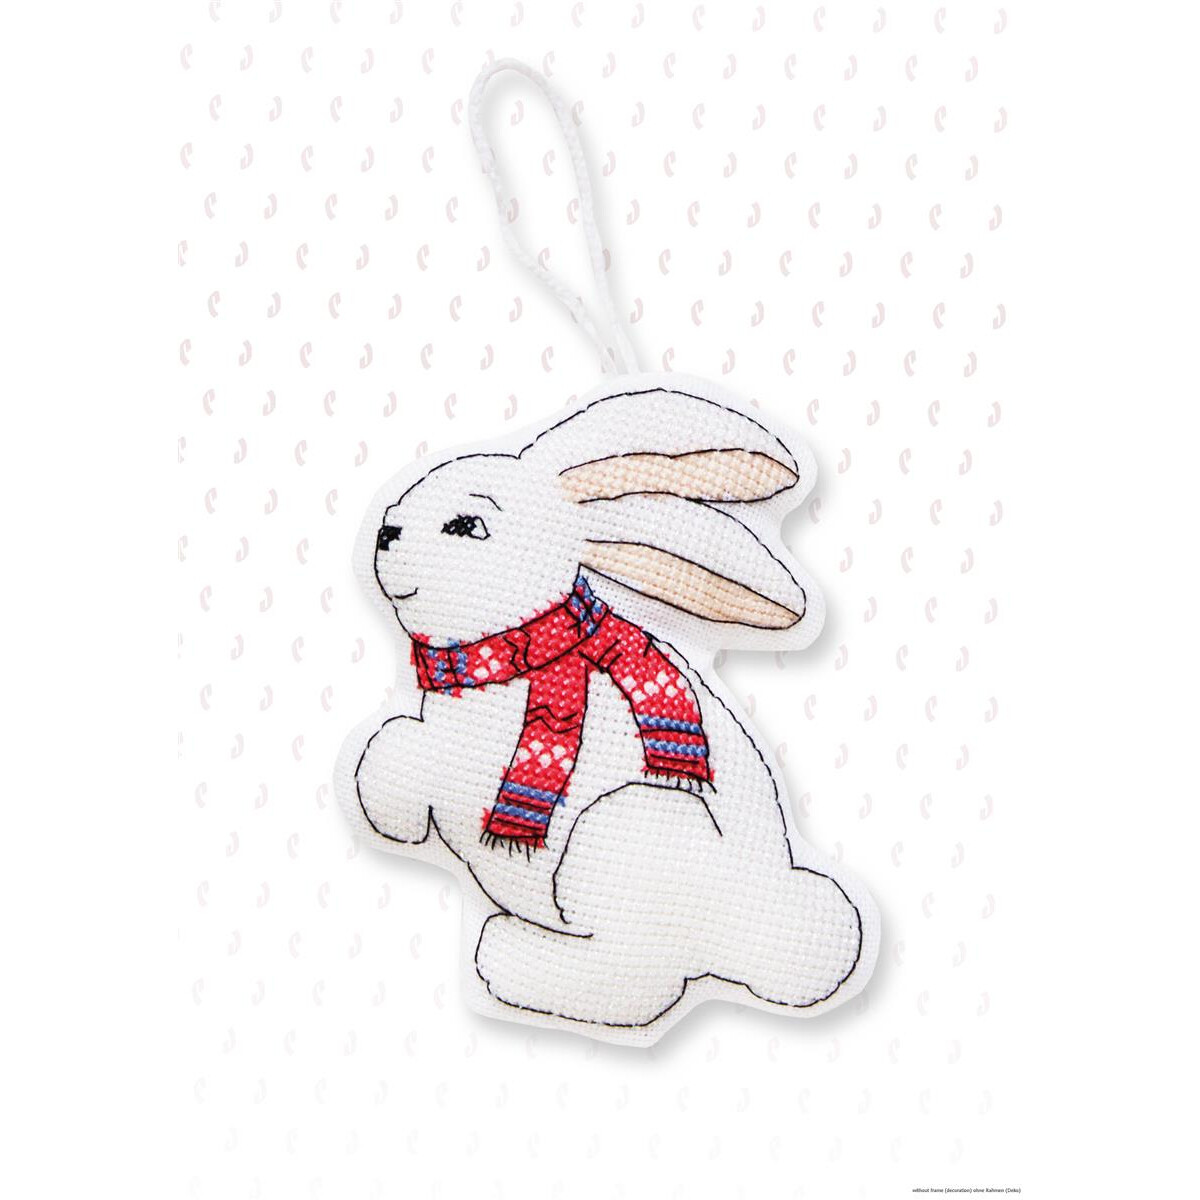 Luca-S counted Cross Stitch kit Toy "Rabbit with red...